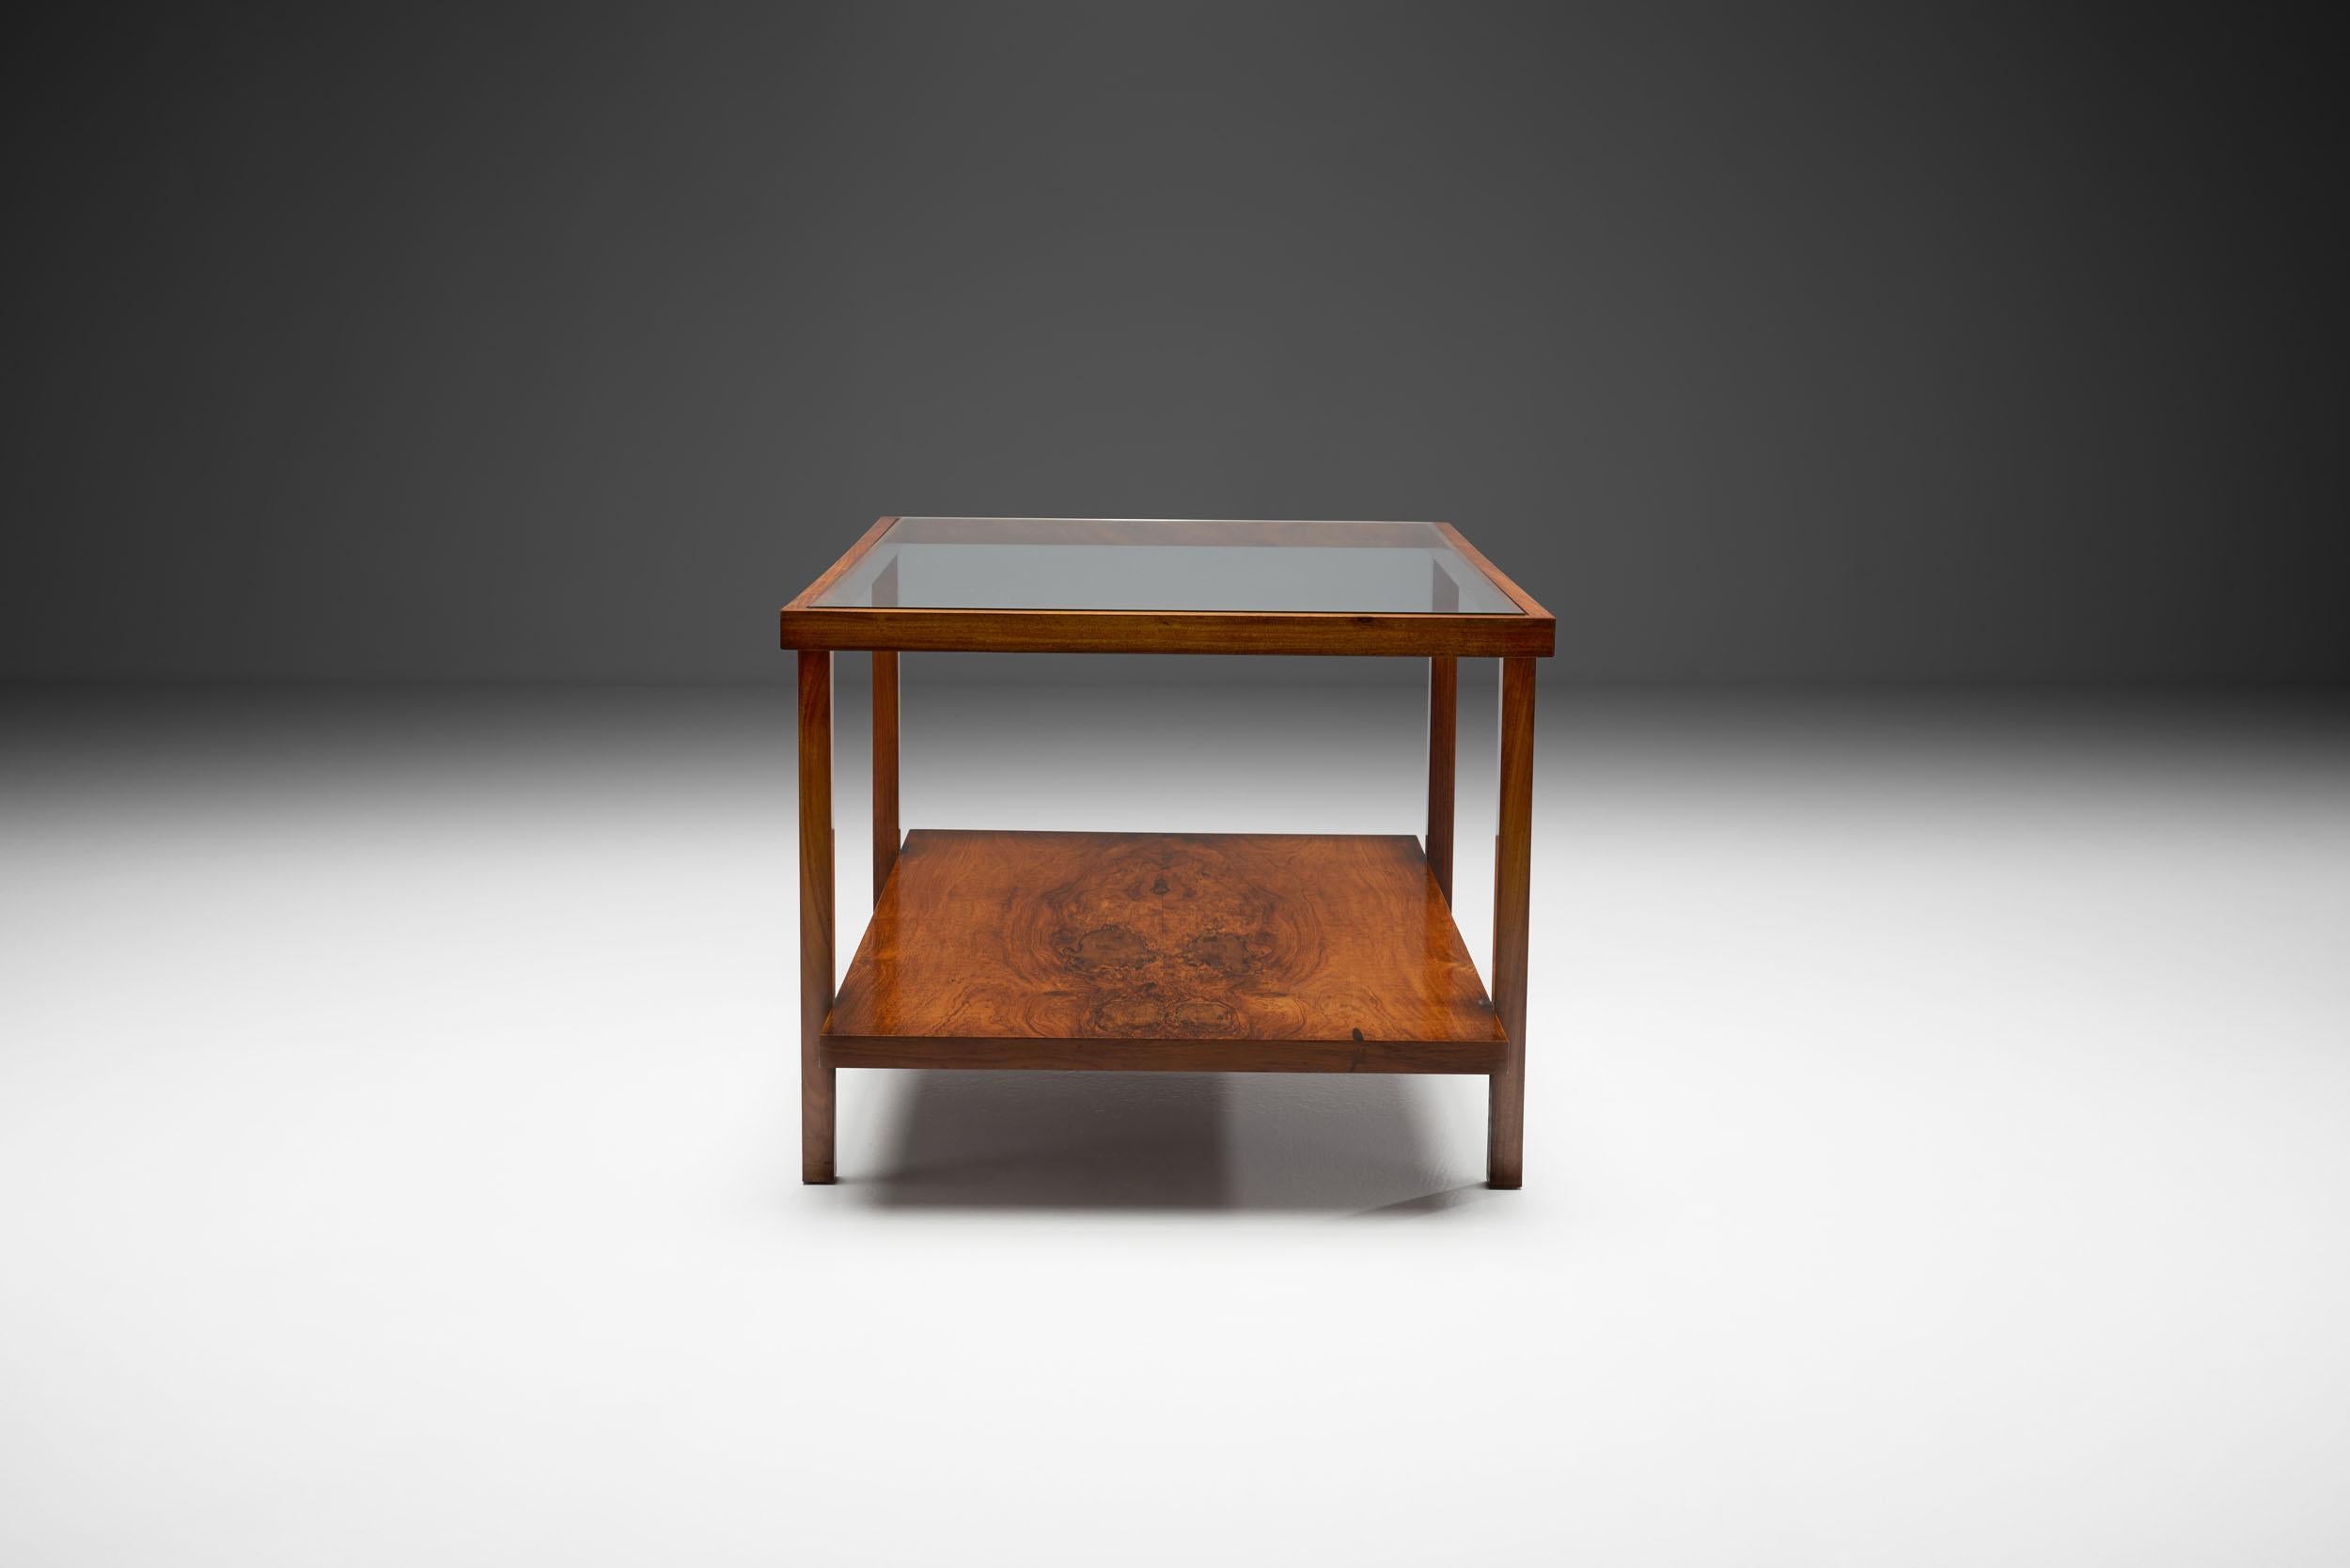 20th Century Rectangular Branco and Preto Wooden Coffee Table, Brazil, 1960s For Sale